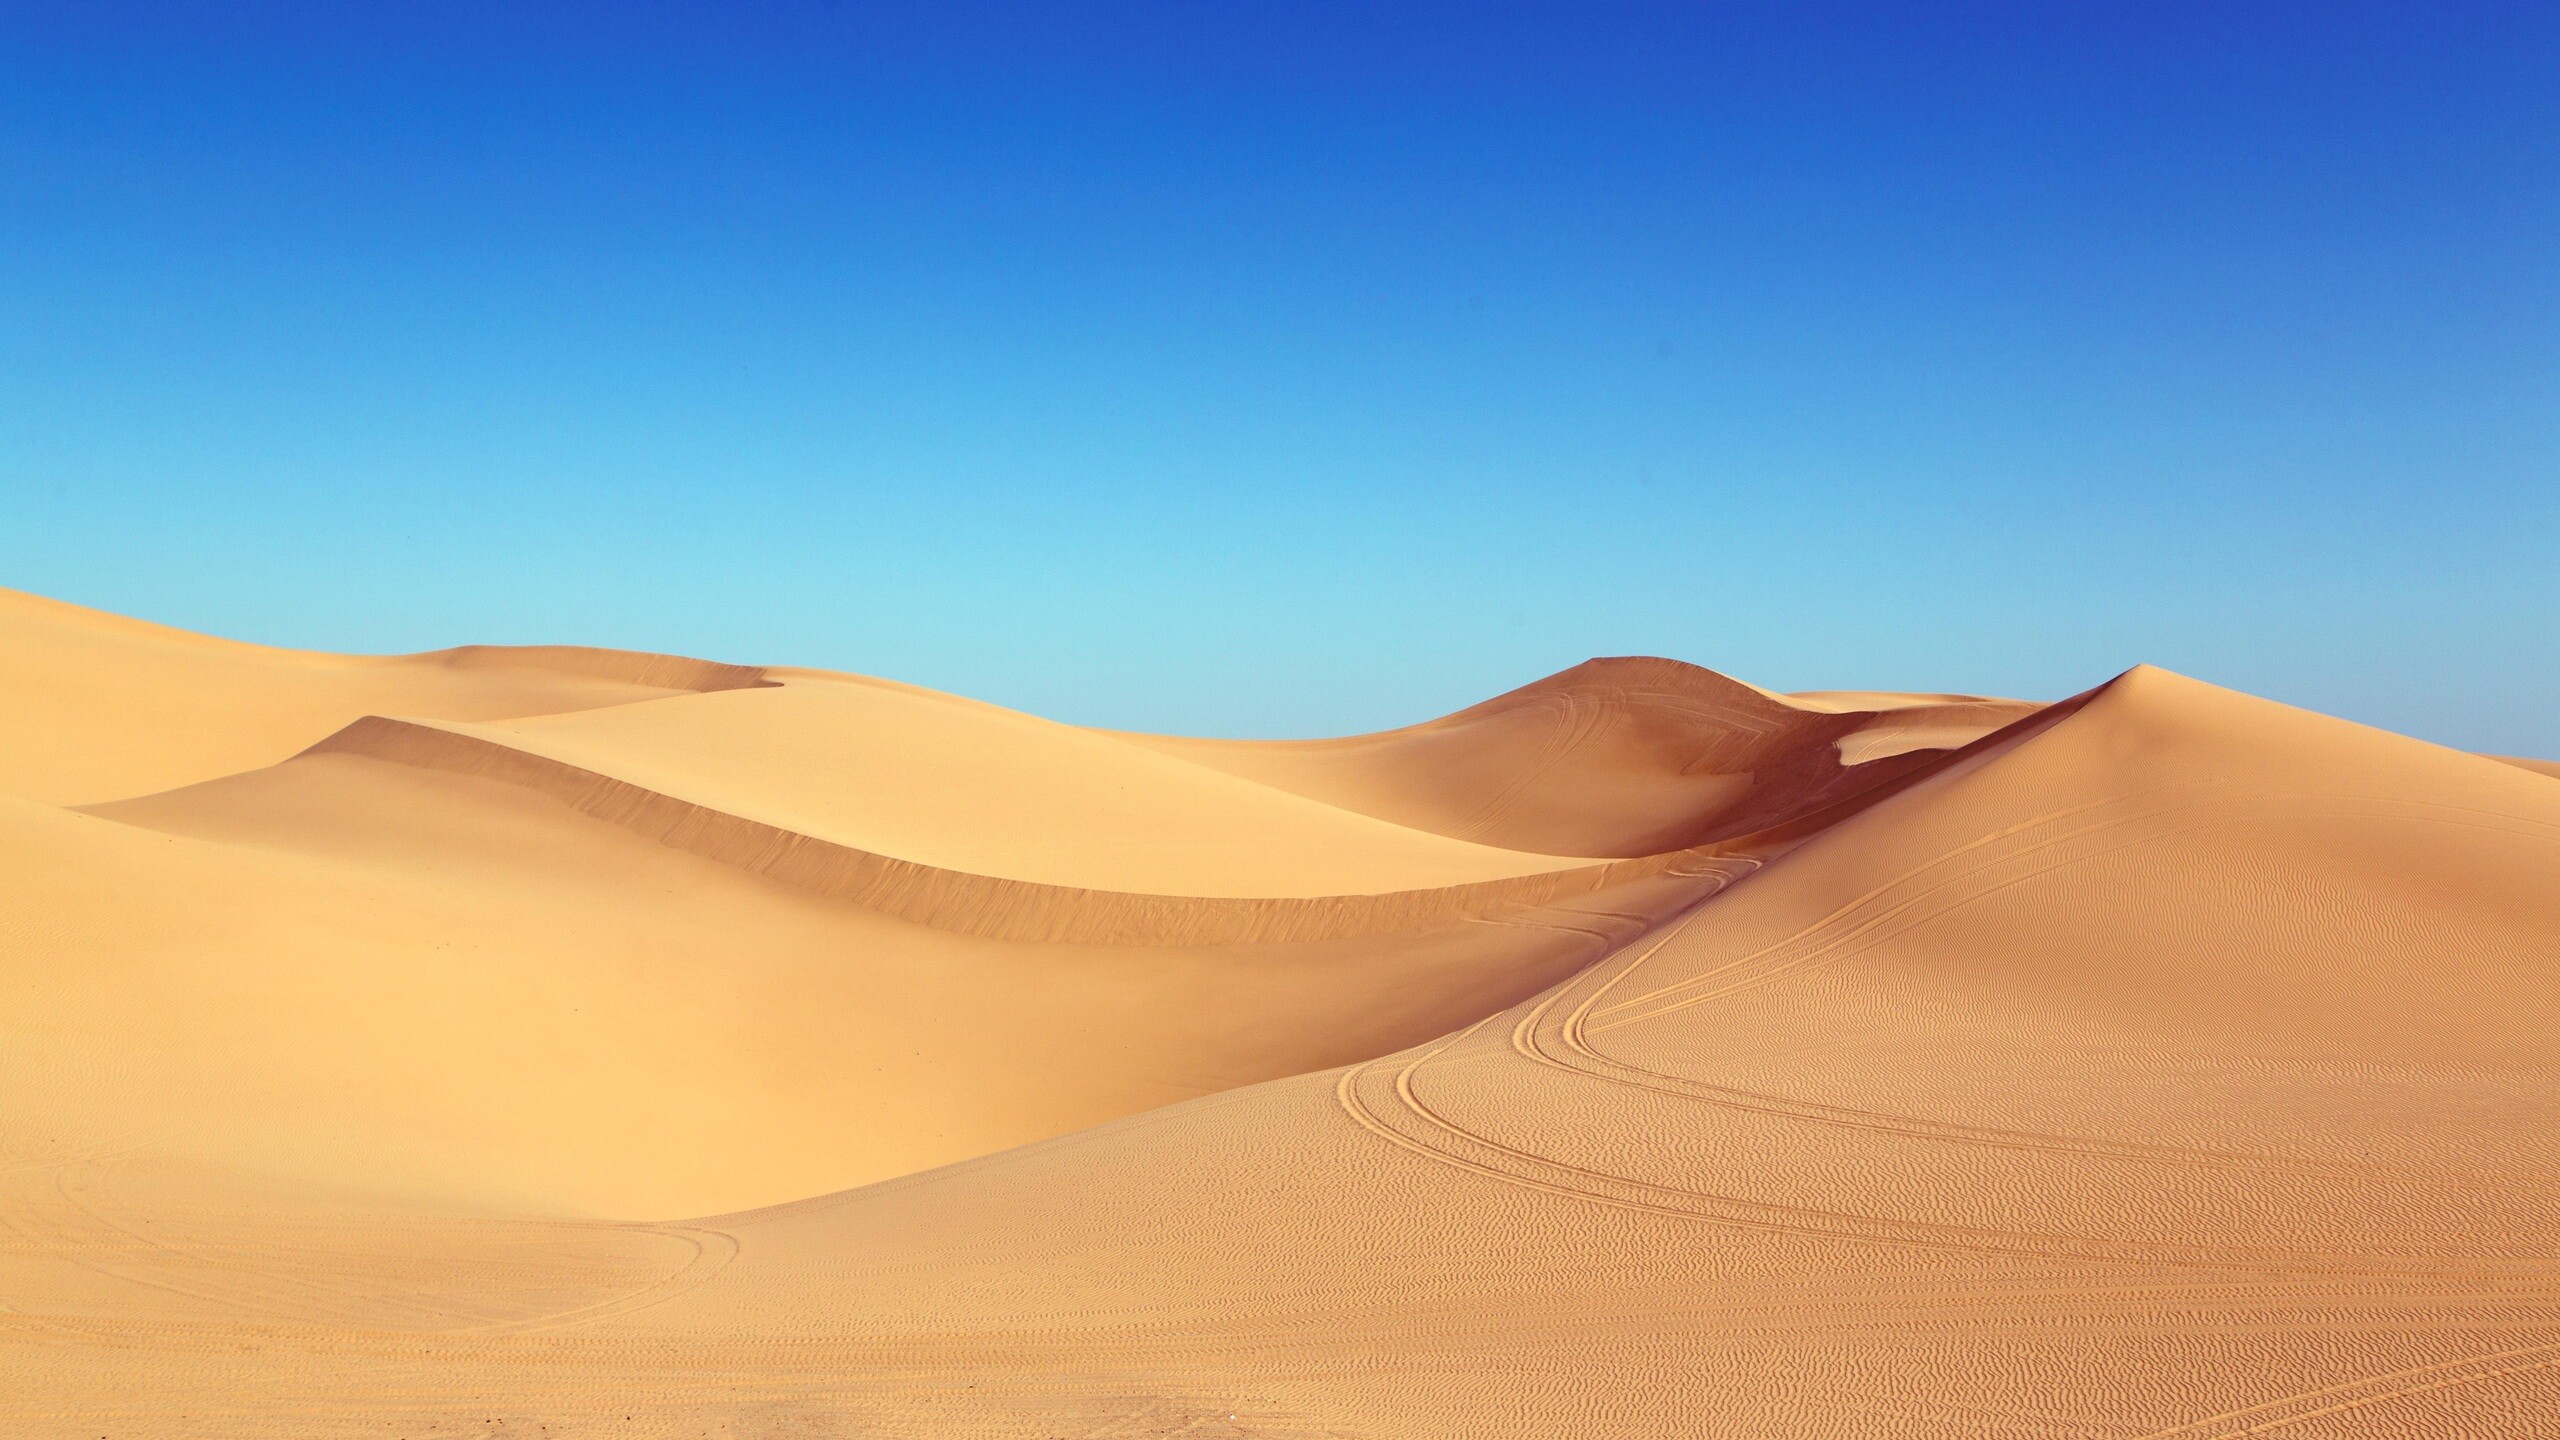 Desert: A non-technical definition is that deserts are those parts of Earth's surface that have insufficient vegetation cover to support a human population. 2560x1440 HD Wallpaper.